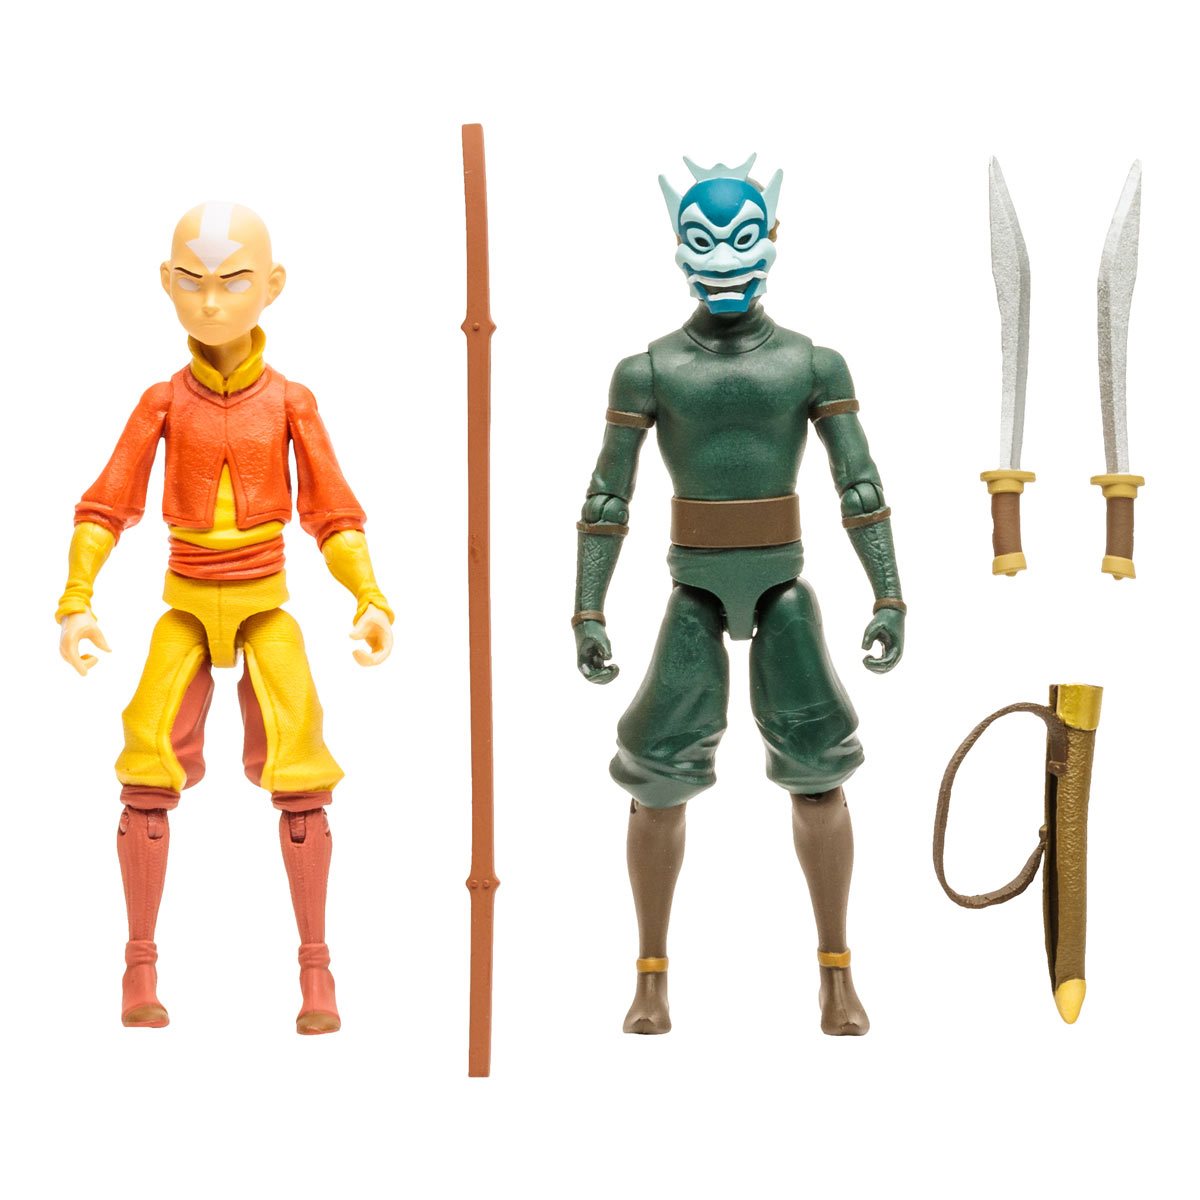 Avatar The Last Airbender Select Wave 3 Set of 2 Figures